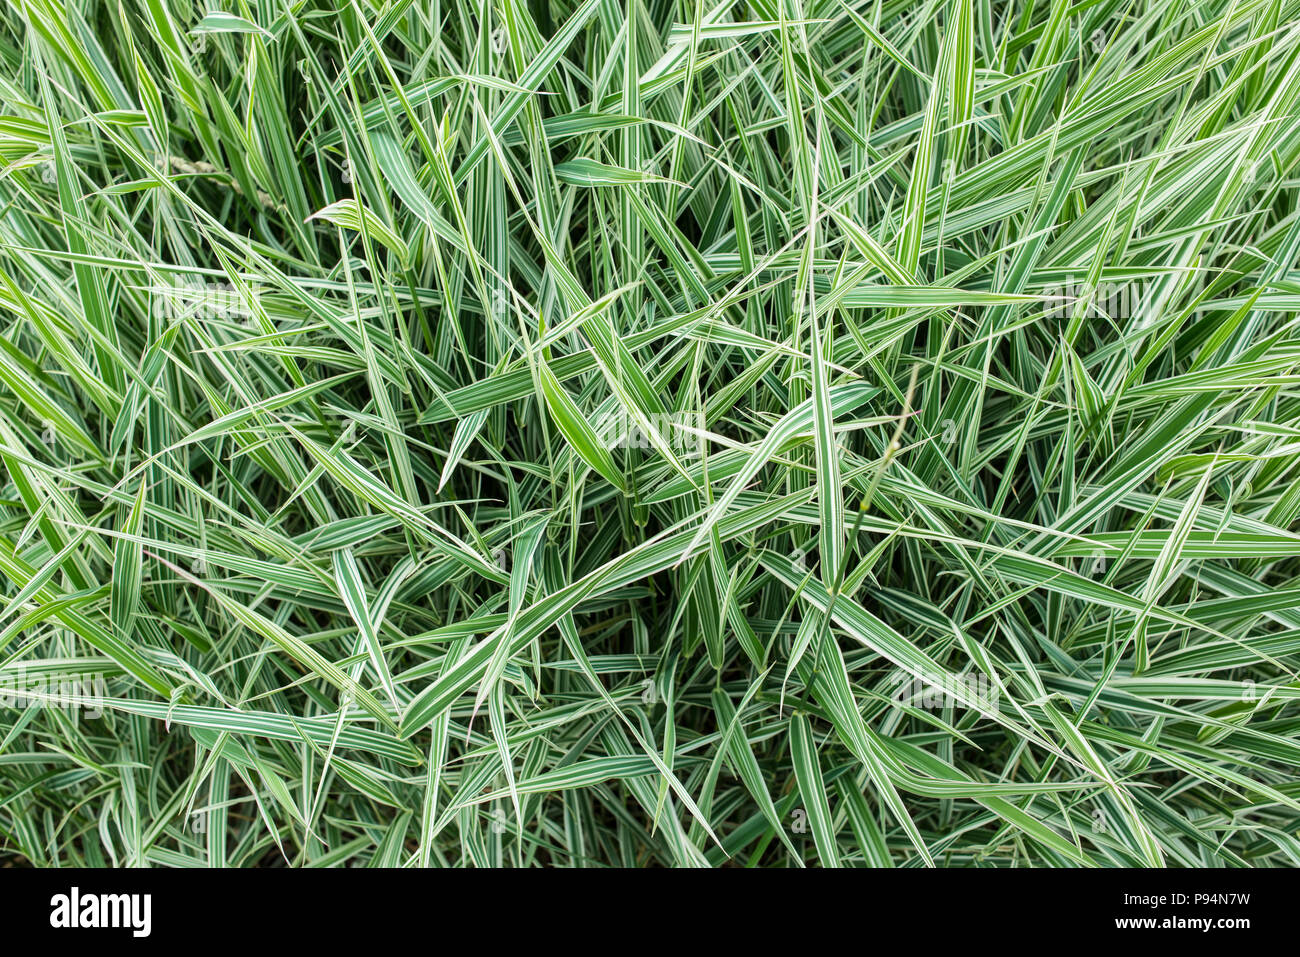 Carex morrowii ‘Ice Dance’ - Ice Dance Sedge - Green and white long grass evergreen sedge with white and green striped foliage. Stock Photo